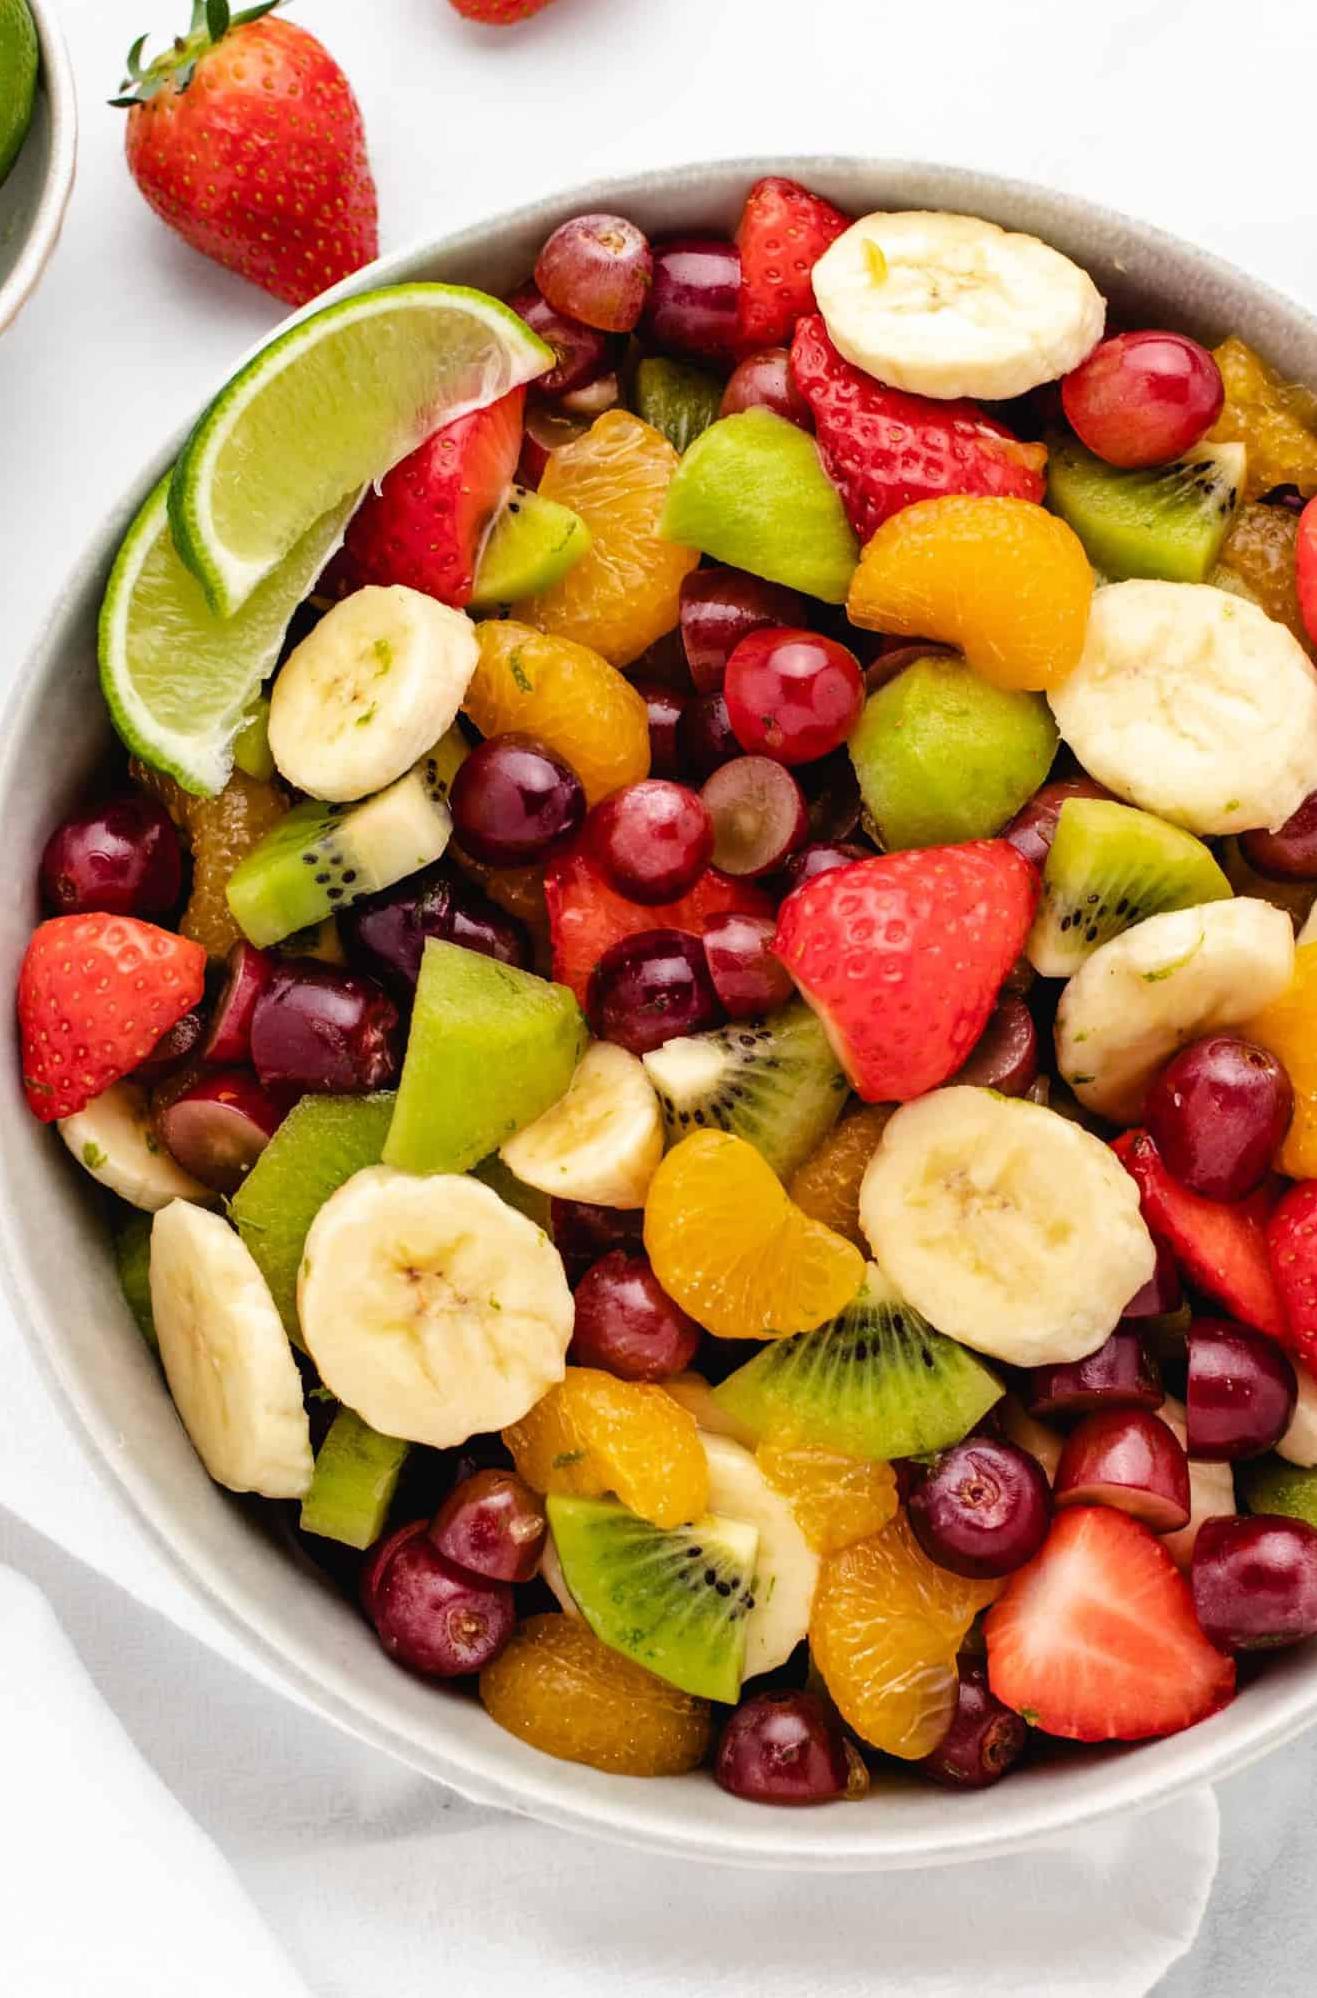  The perfect balance of sweet and tart, this Palm Springs fruit salad is a refreshing treat.